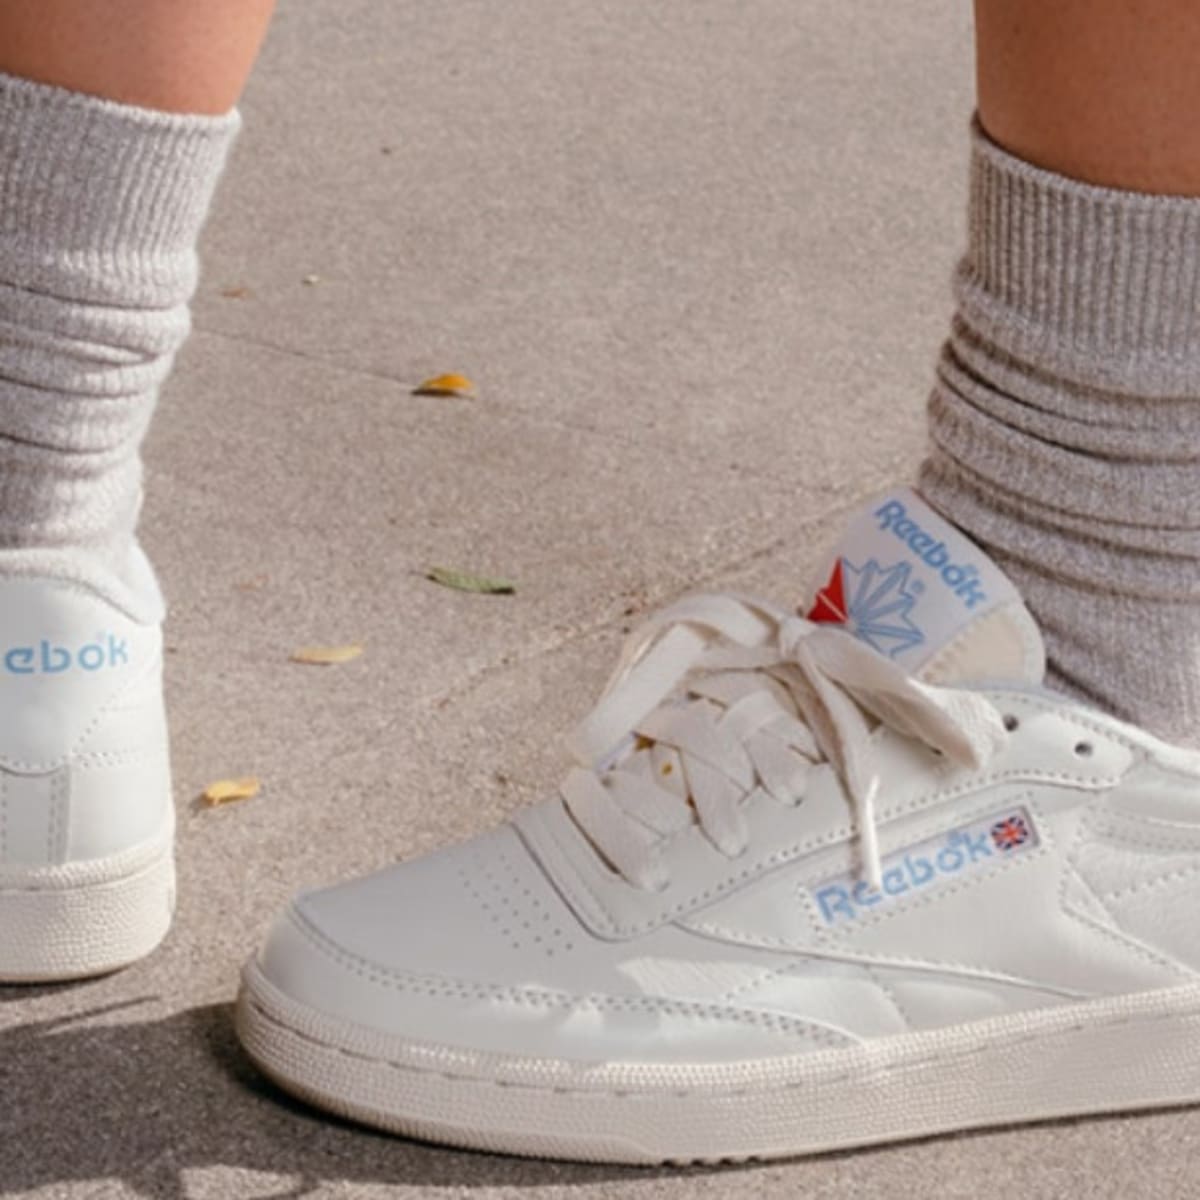 cement vægt Indsprøjtning The 8 Best Reebok Shoes You Need Right Now - Sports Illustrated